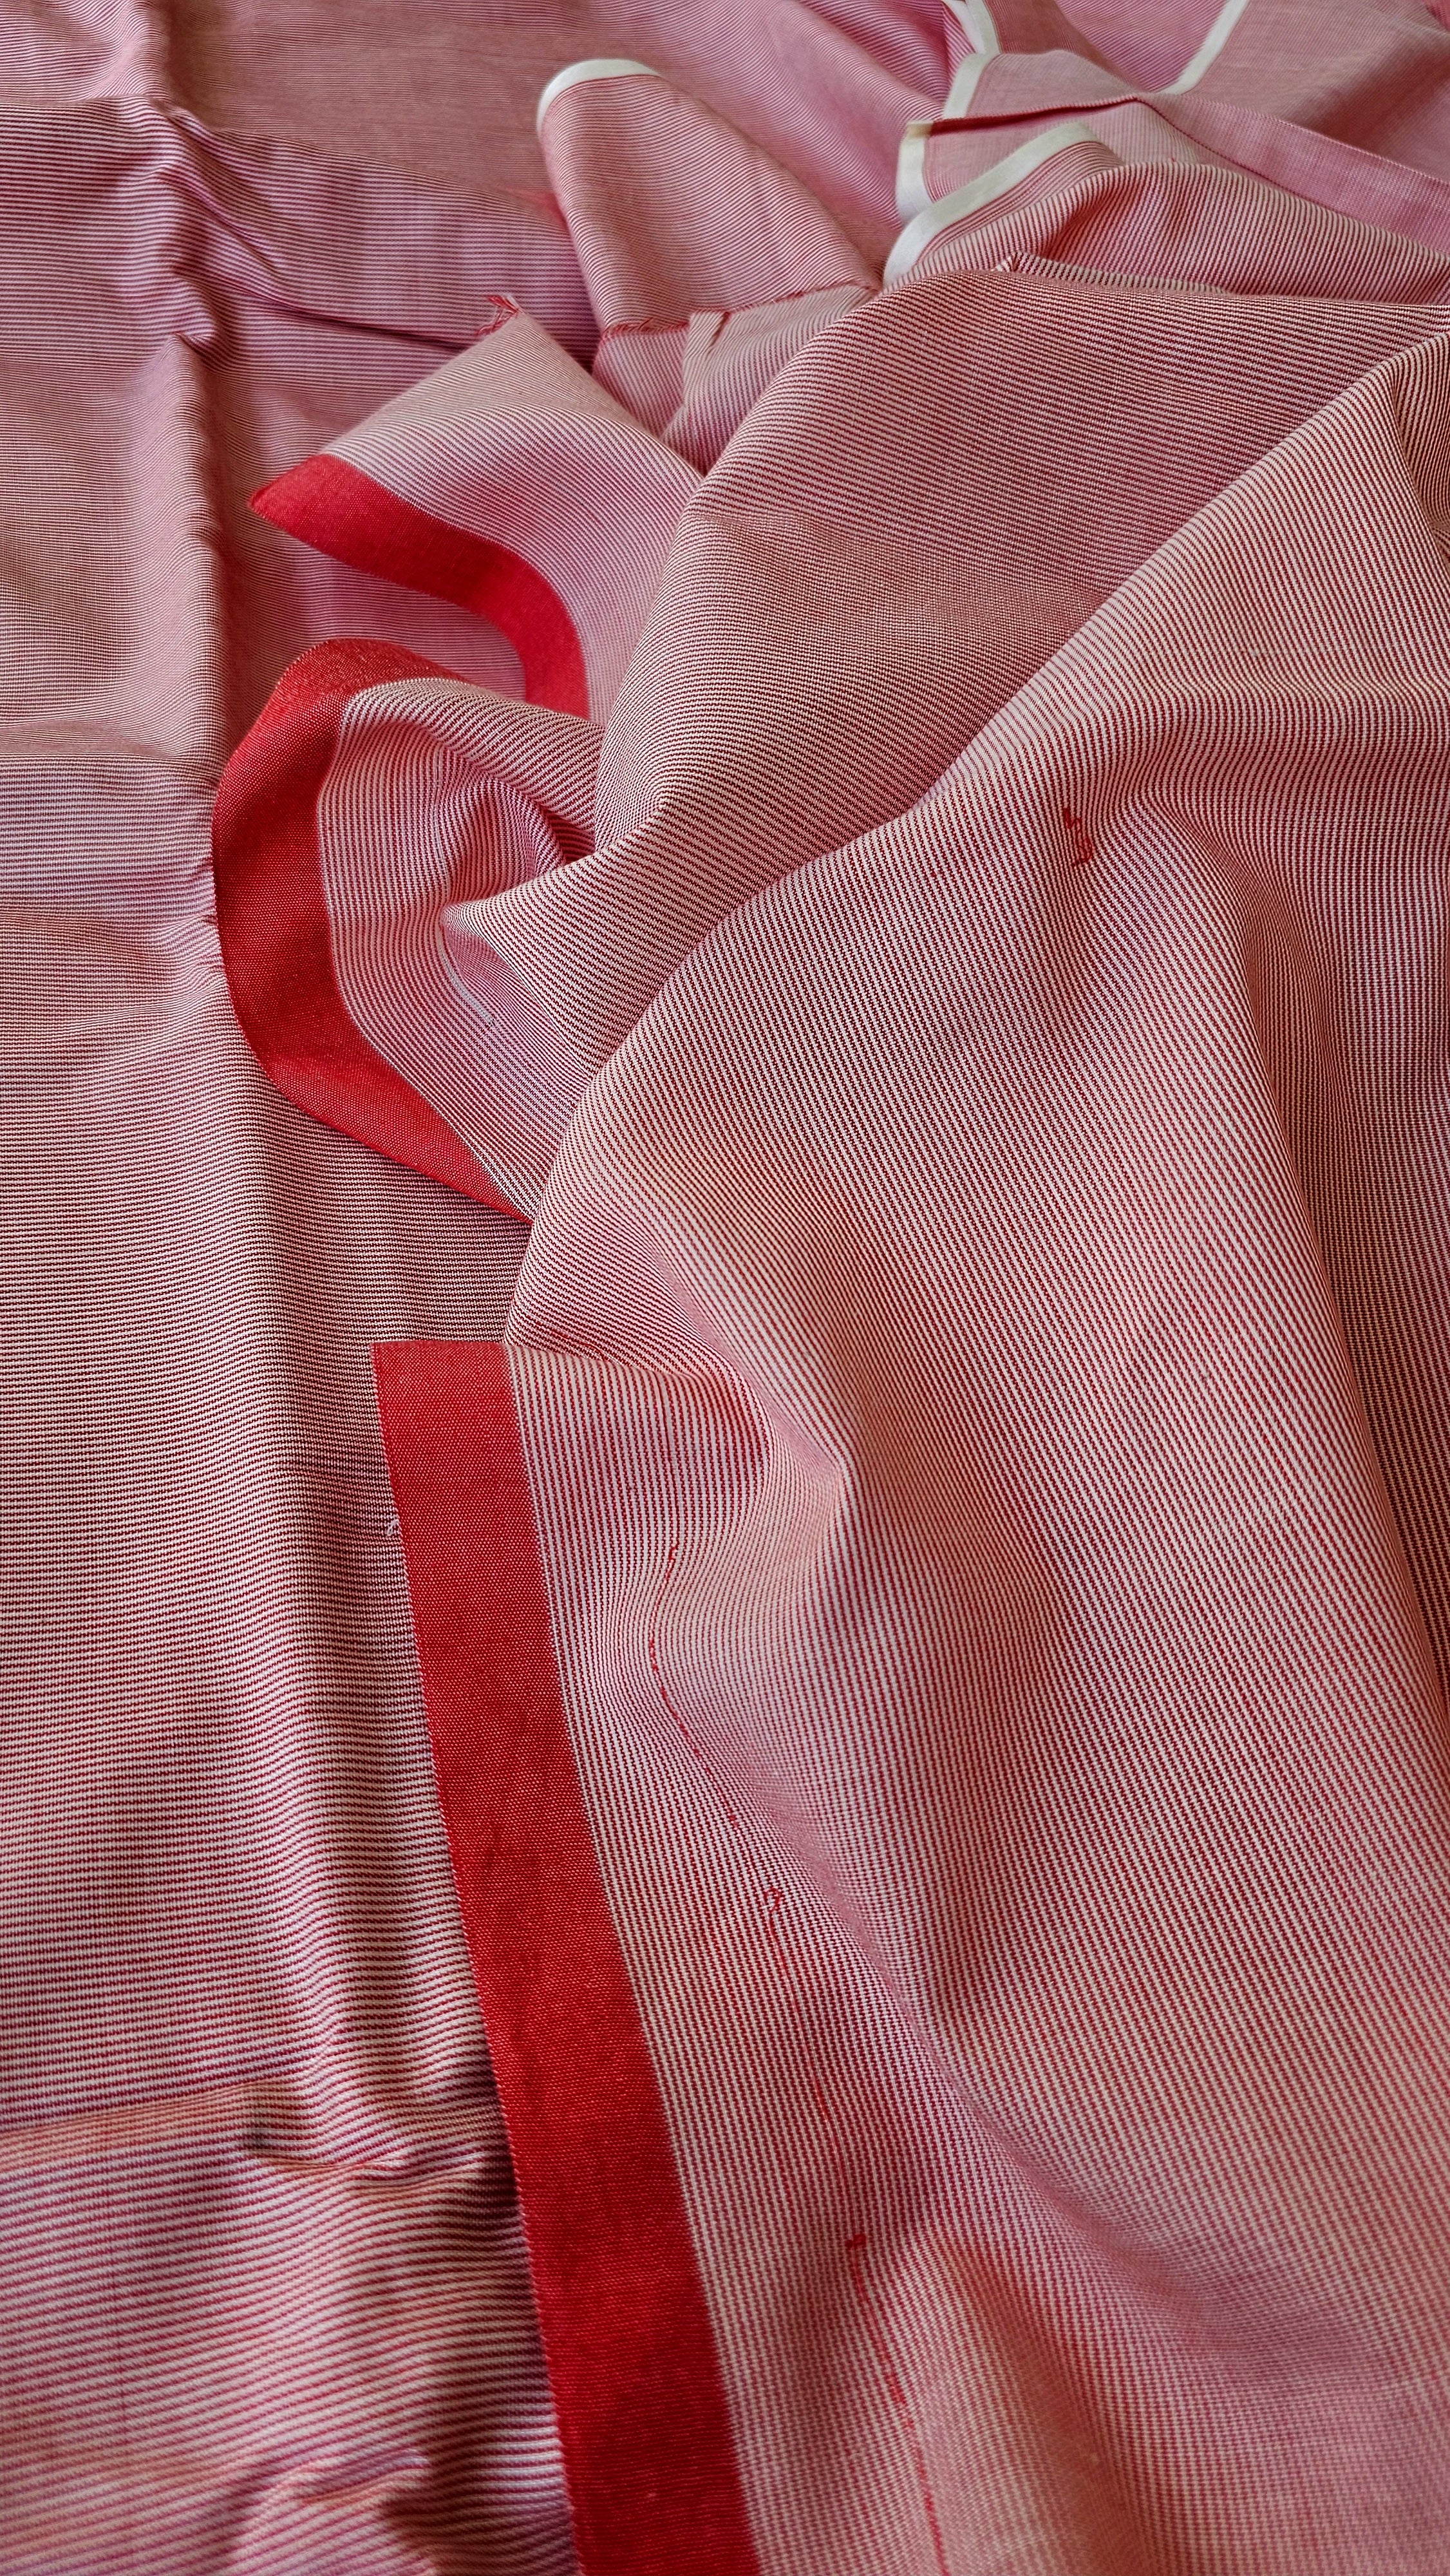 Pure Cotton Fabric with Red and White Warp Stripes.